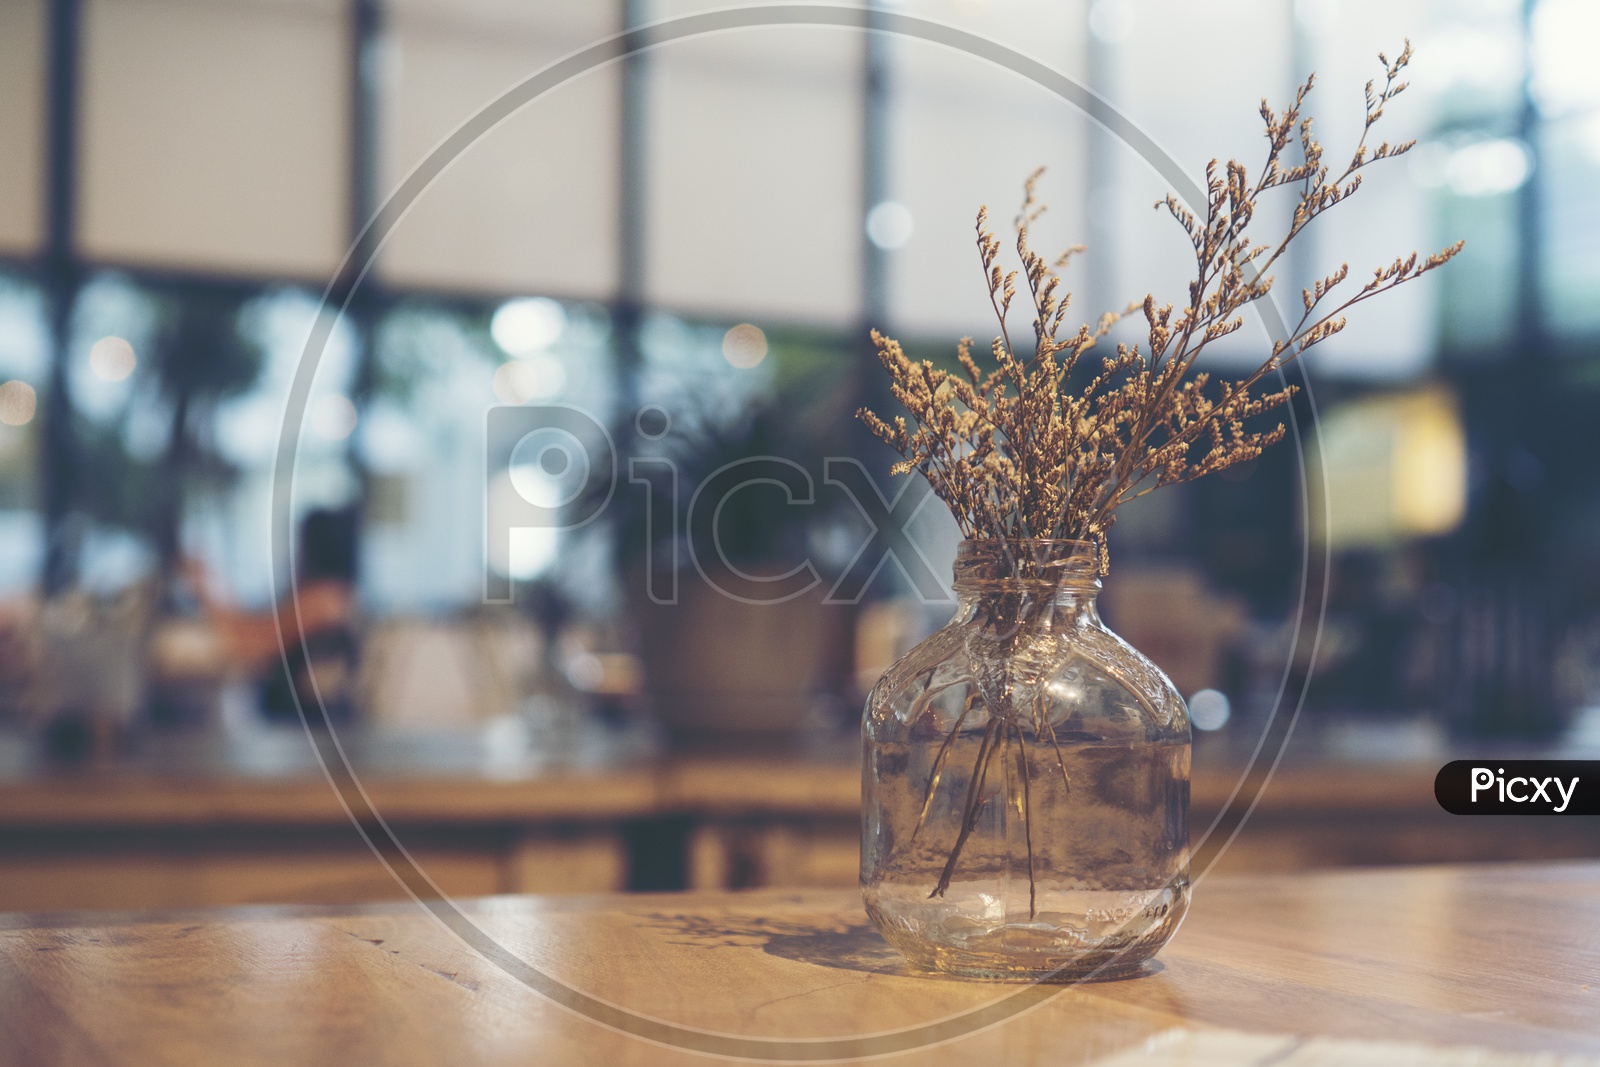 Dried Vintage Flowers On a Cafe Table